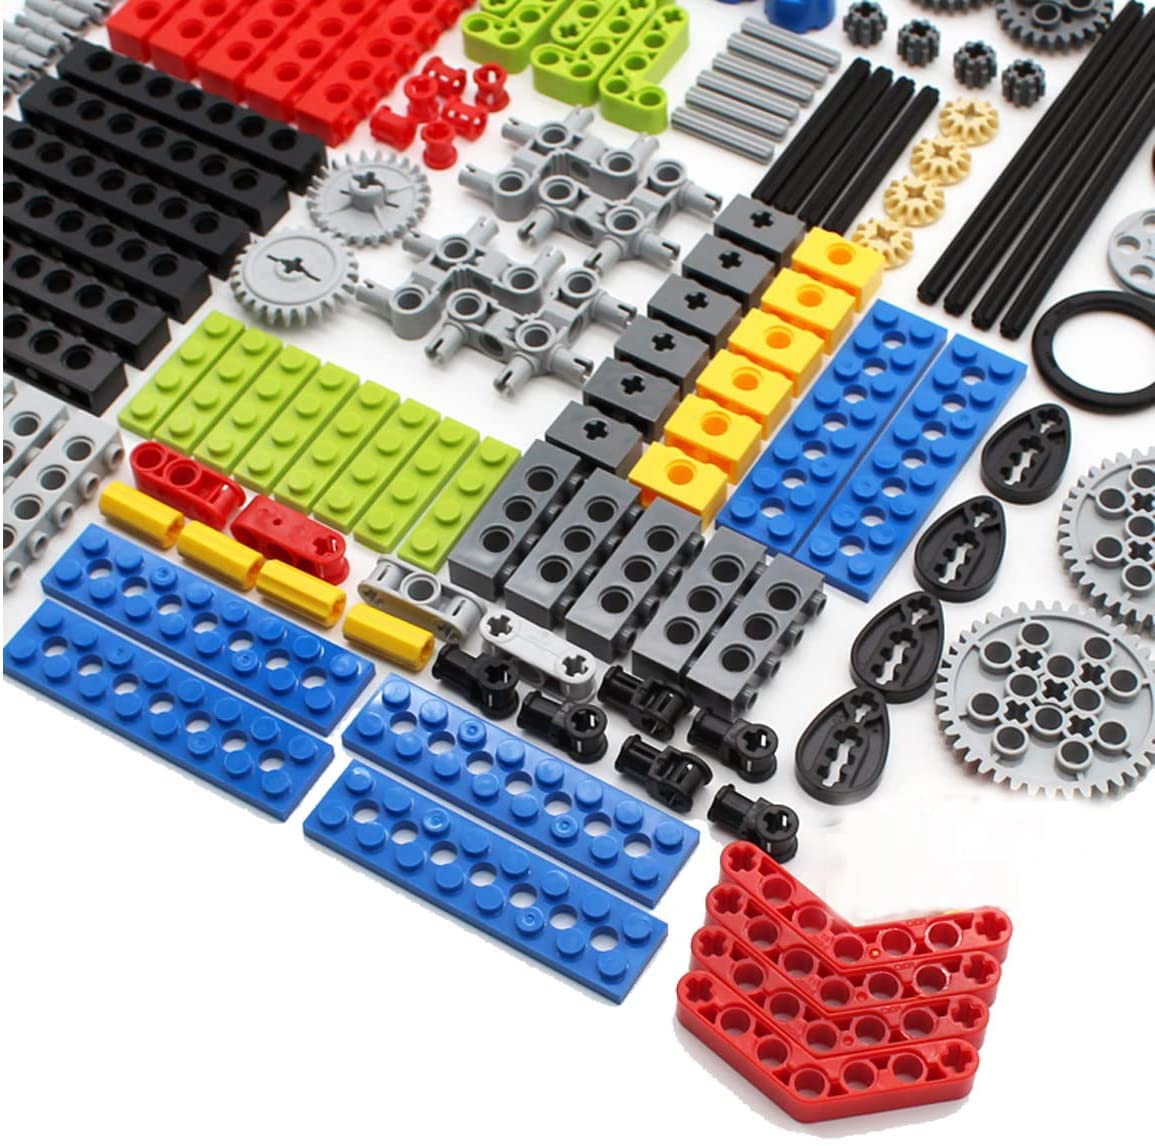 KonHaovF 182PCS Gear and Axle Set for Technic Parts Compatible with Major Brand Technic Parts, DIY Gears Assortment Pack(Liftarm, Pins, Axles, Connectors) for Technic Building Blocks Set